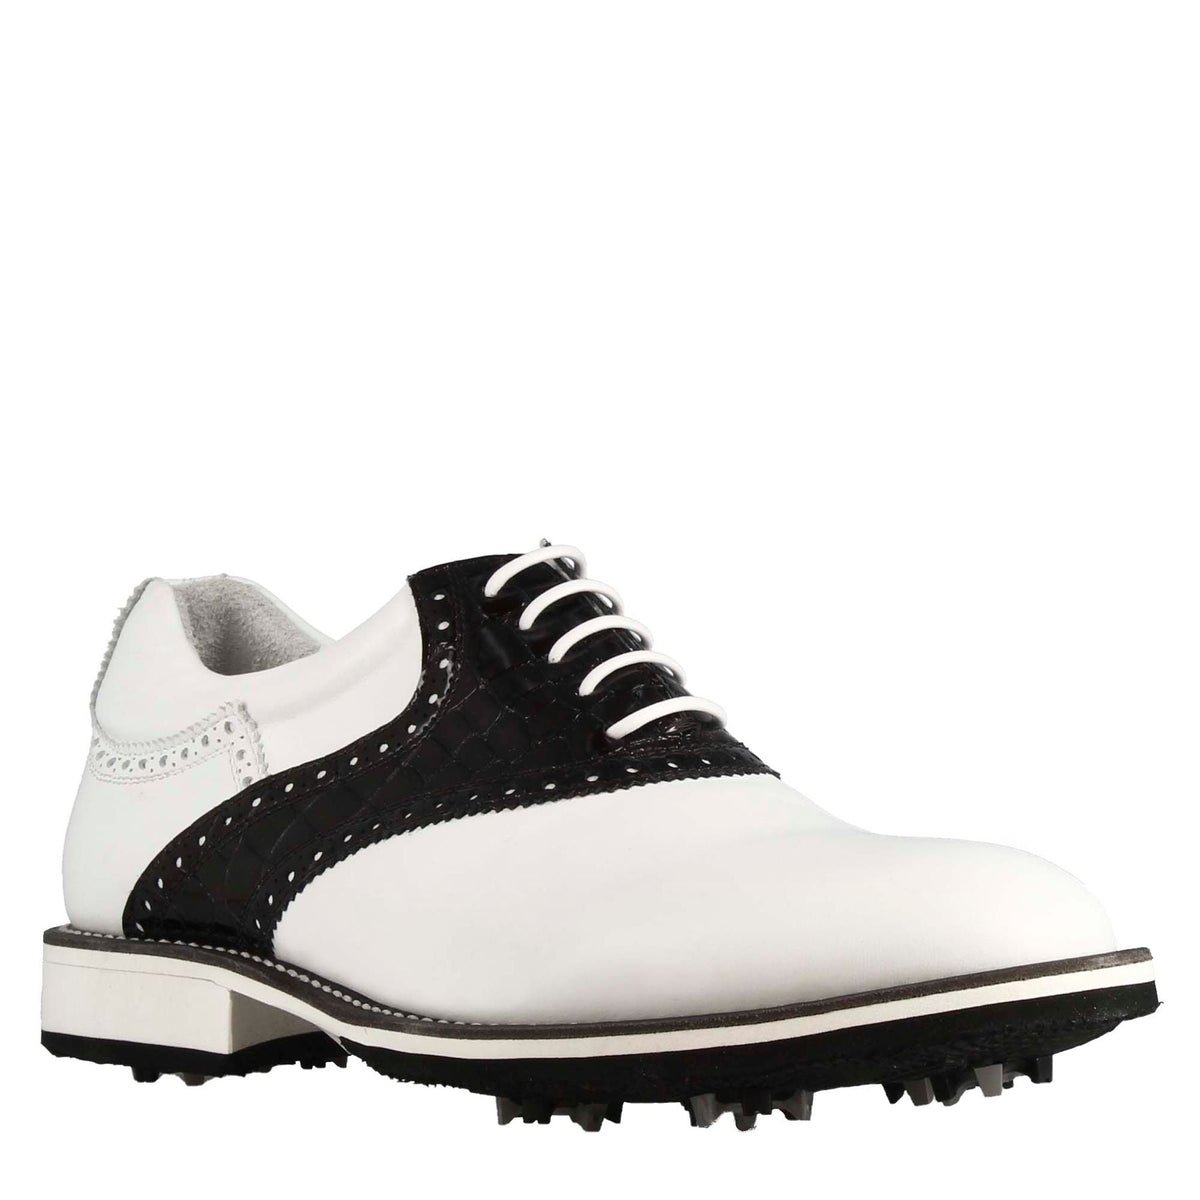 Handcrafted women's golf shoe in white leather with black leather details